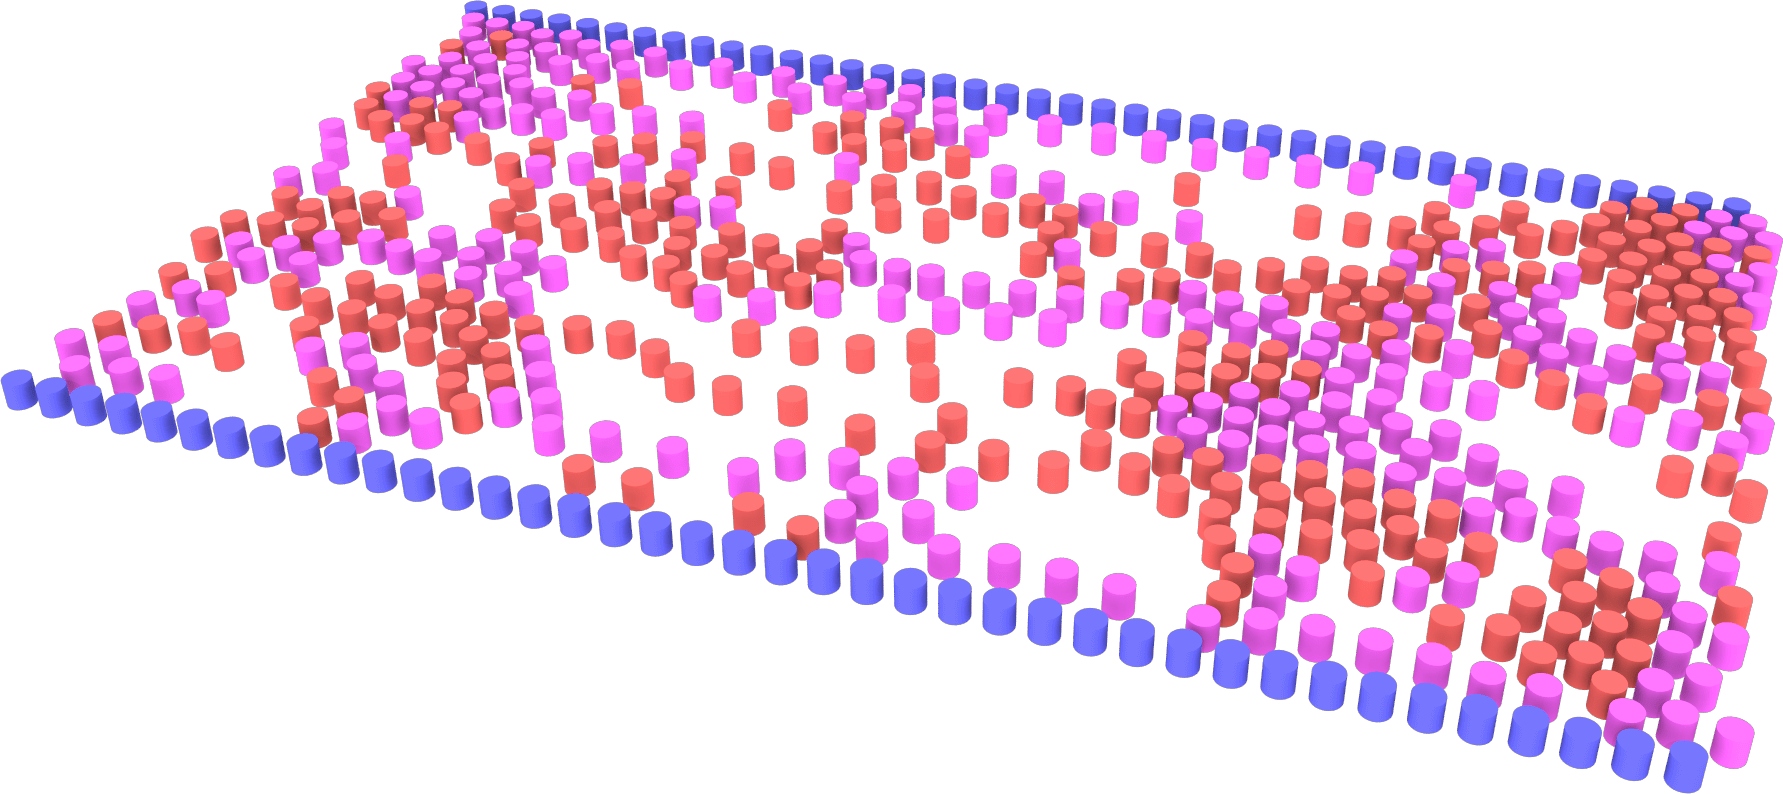 Simulation of pedestrian counterflow (red and pink particles) confined within a hallway (blue boundary), under conditions of weak social distancing.
Credit: Kelby Kramer and Gerald J. Wang